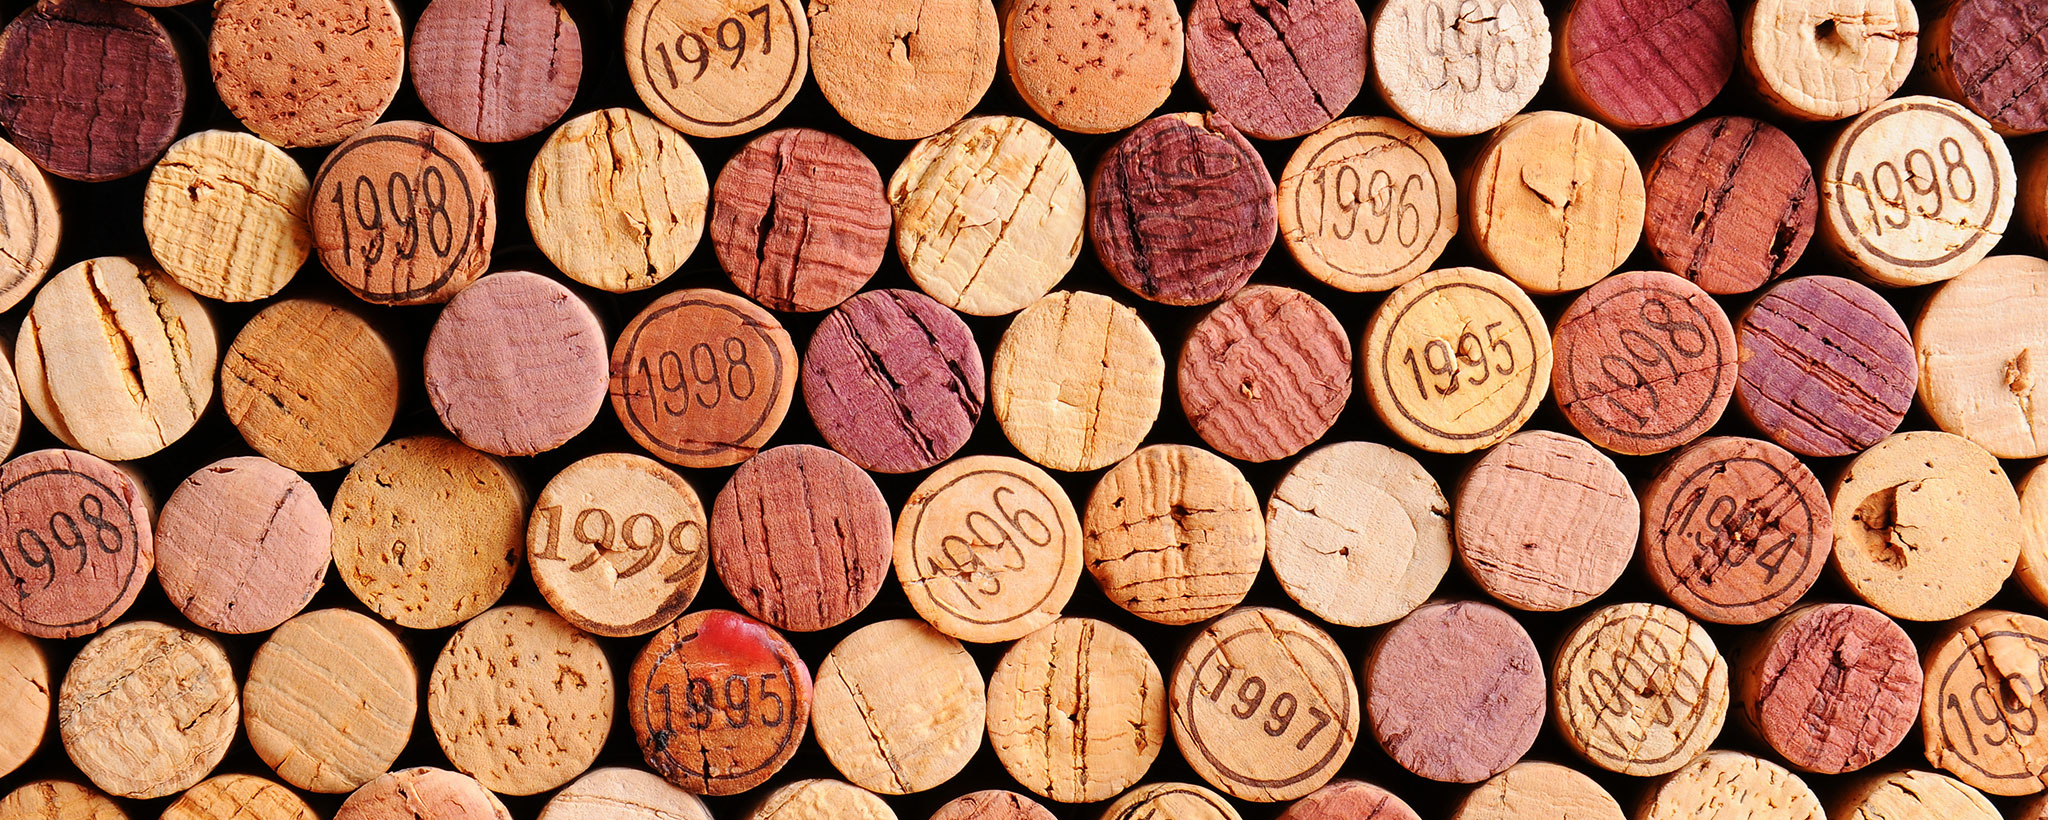 wine corks stacked neatly